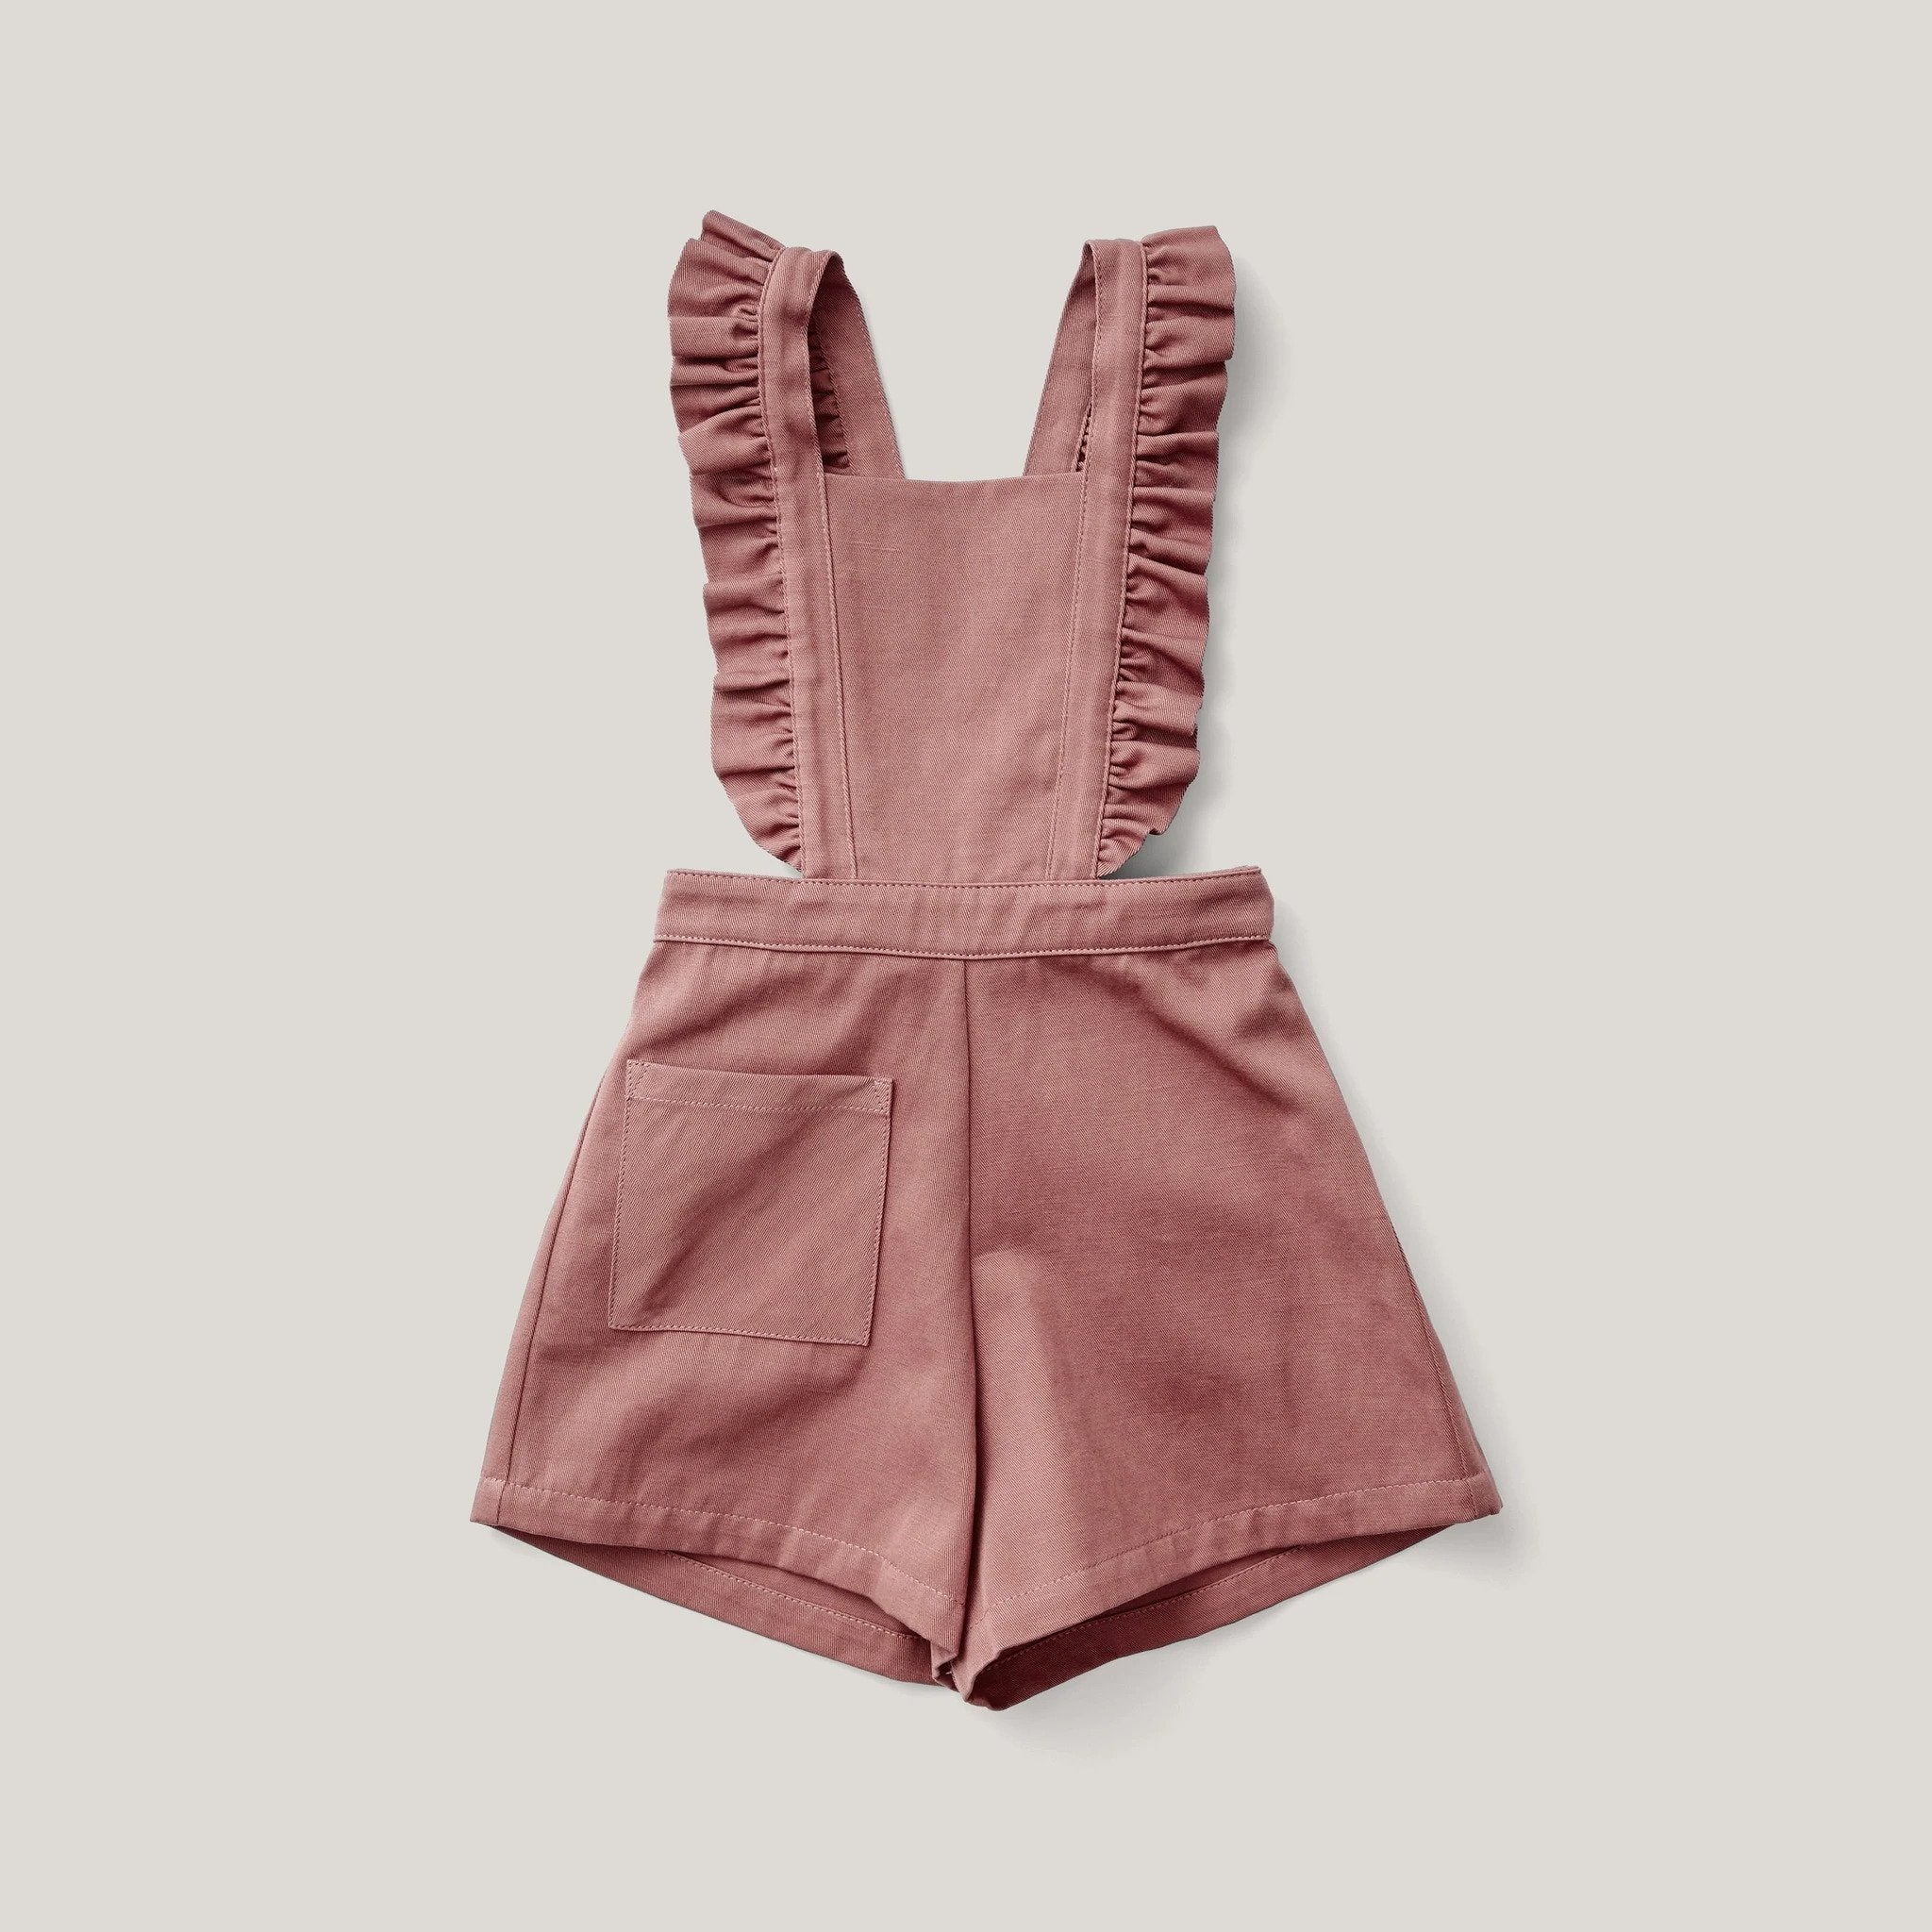 We Are Kids, Romy Jumper in Super Pink – CouCou